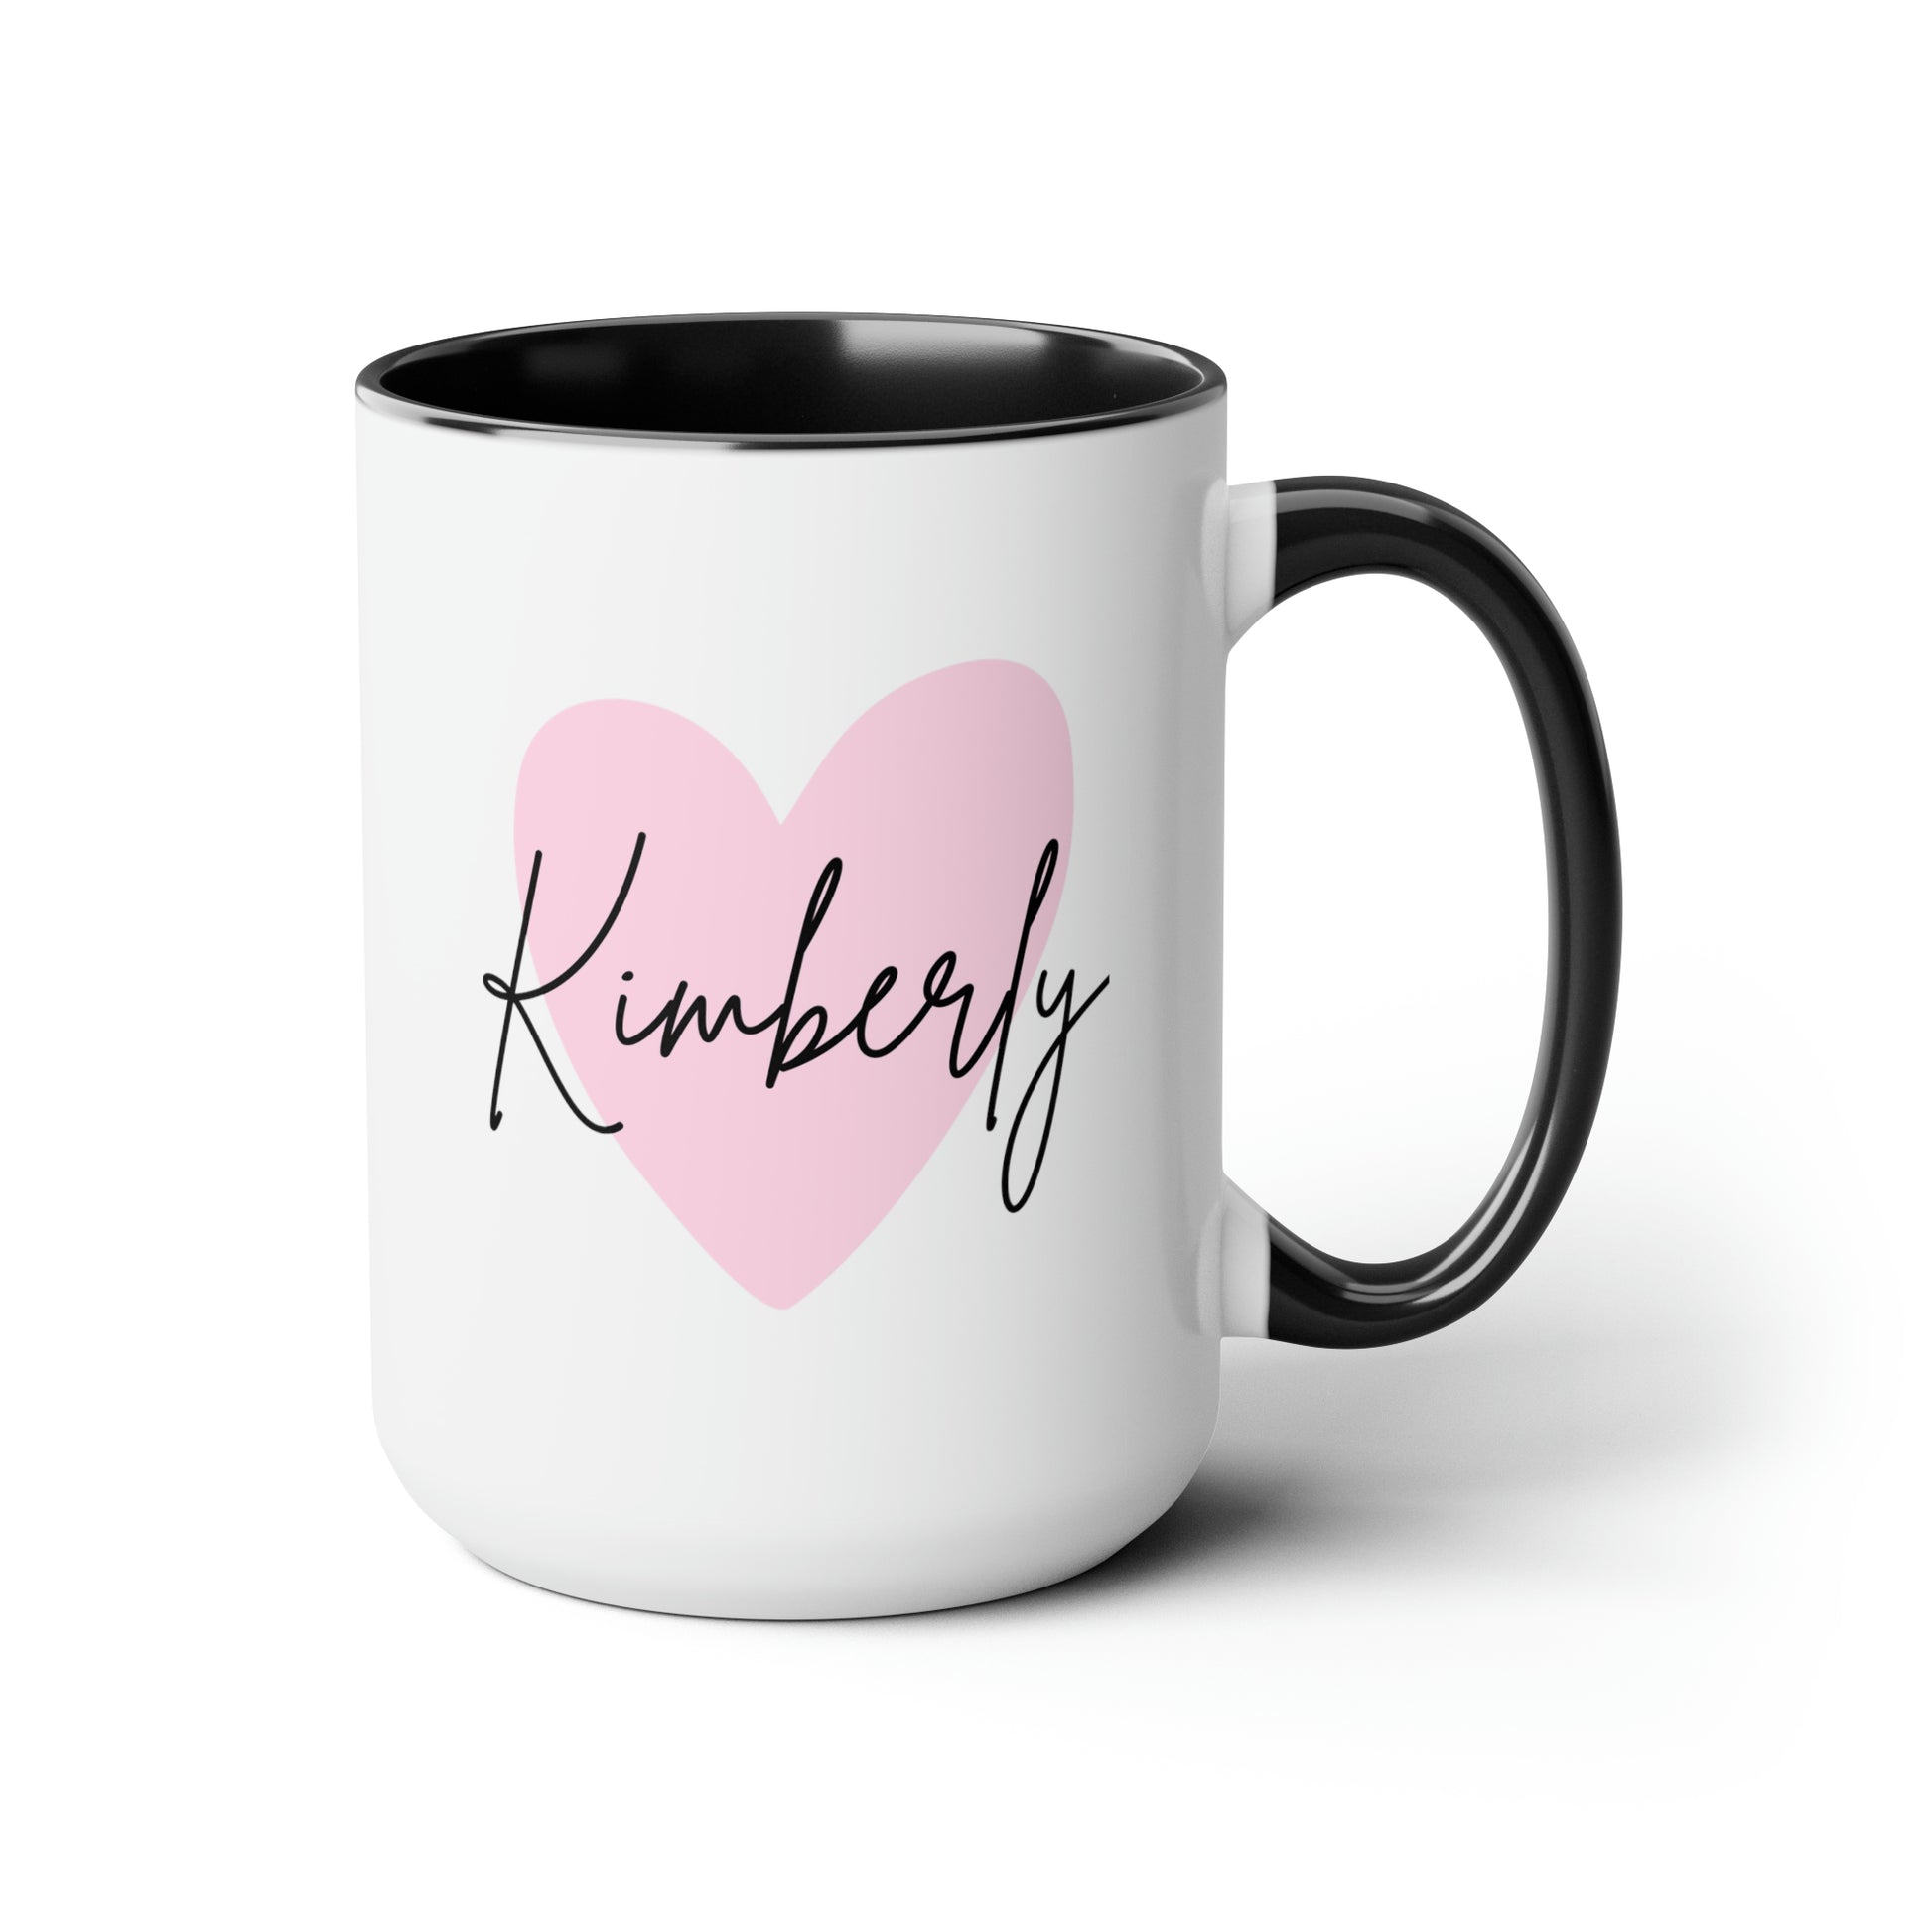 Name 15oz white with black accent funny large coffee mug gift for her mom grandma friend heart custom customized personalized waveywares wavey wares wavywares wavy wares